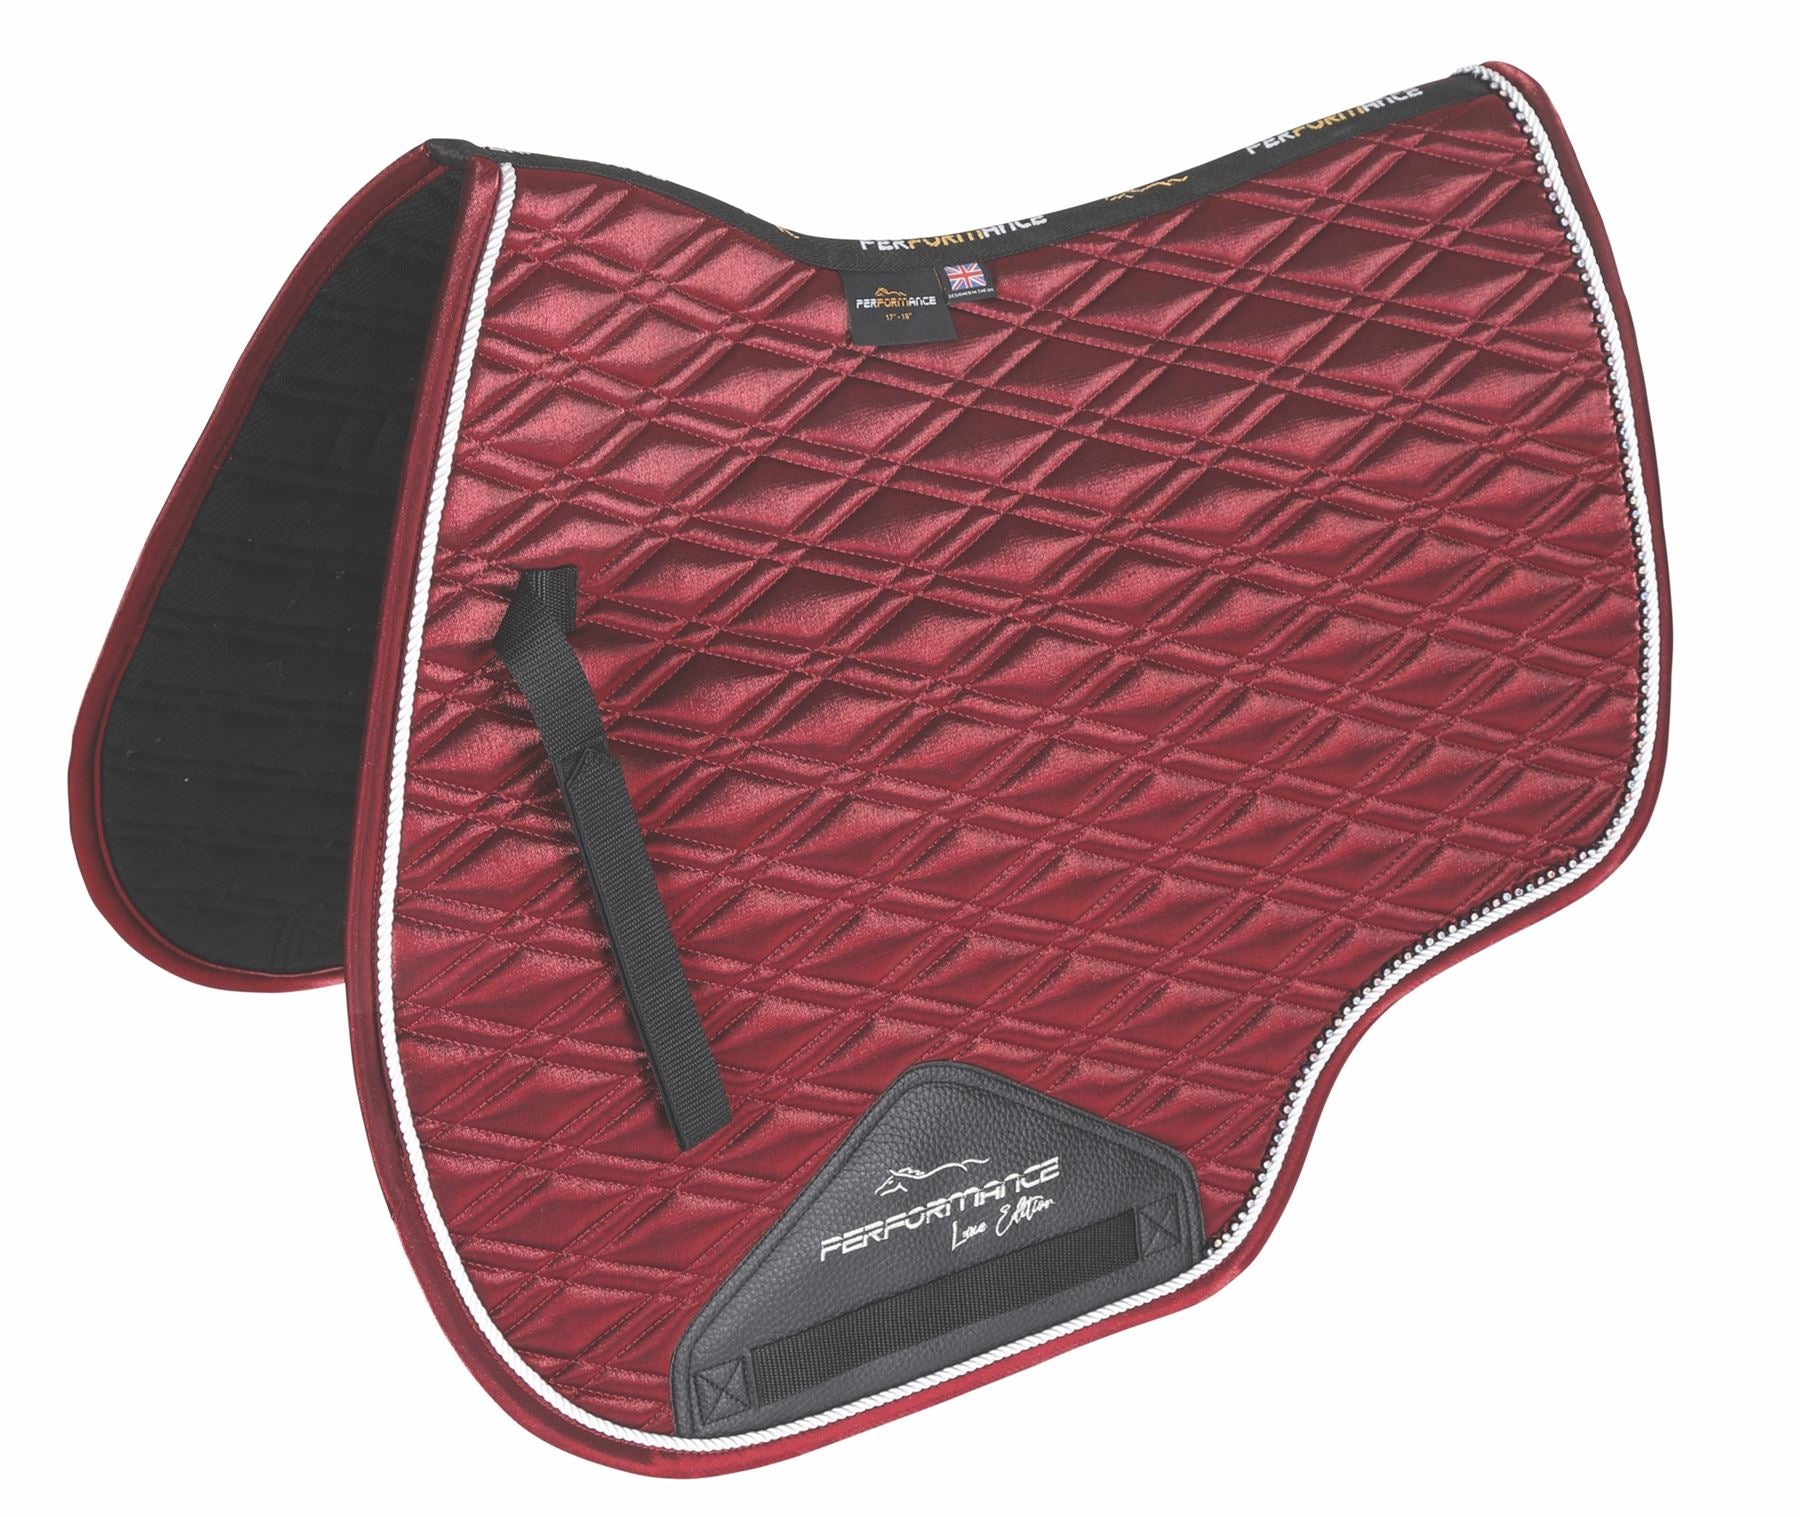 Shires Performance Euro Cut Luxe Saddlecloth - Just Horse Riders